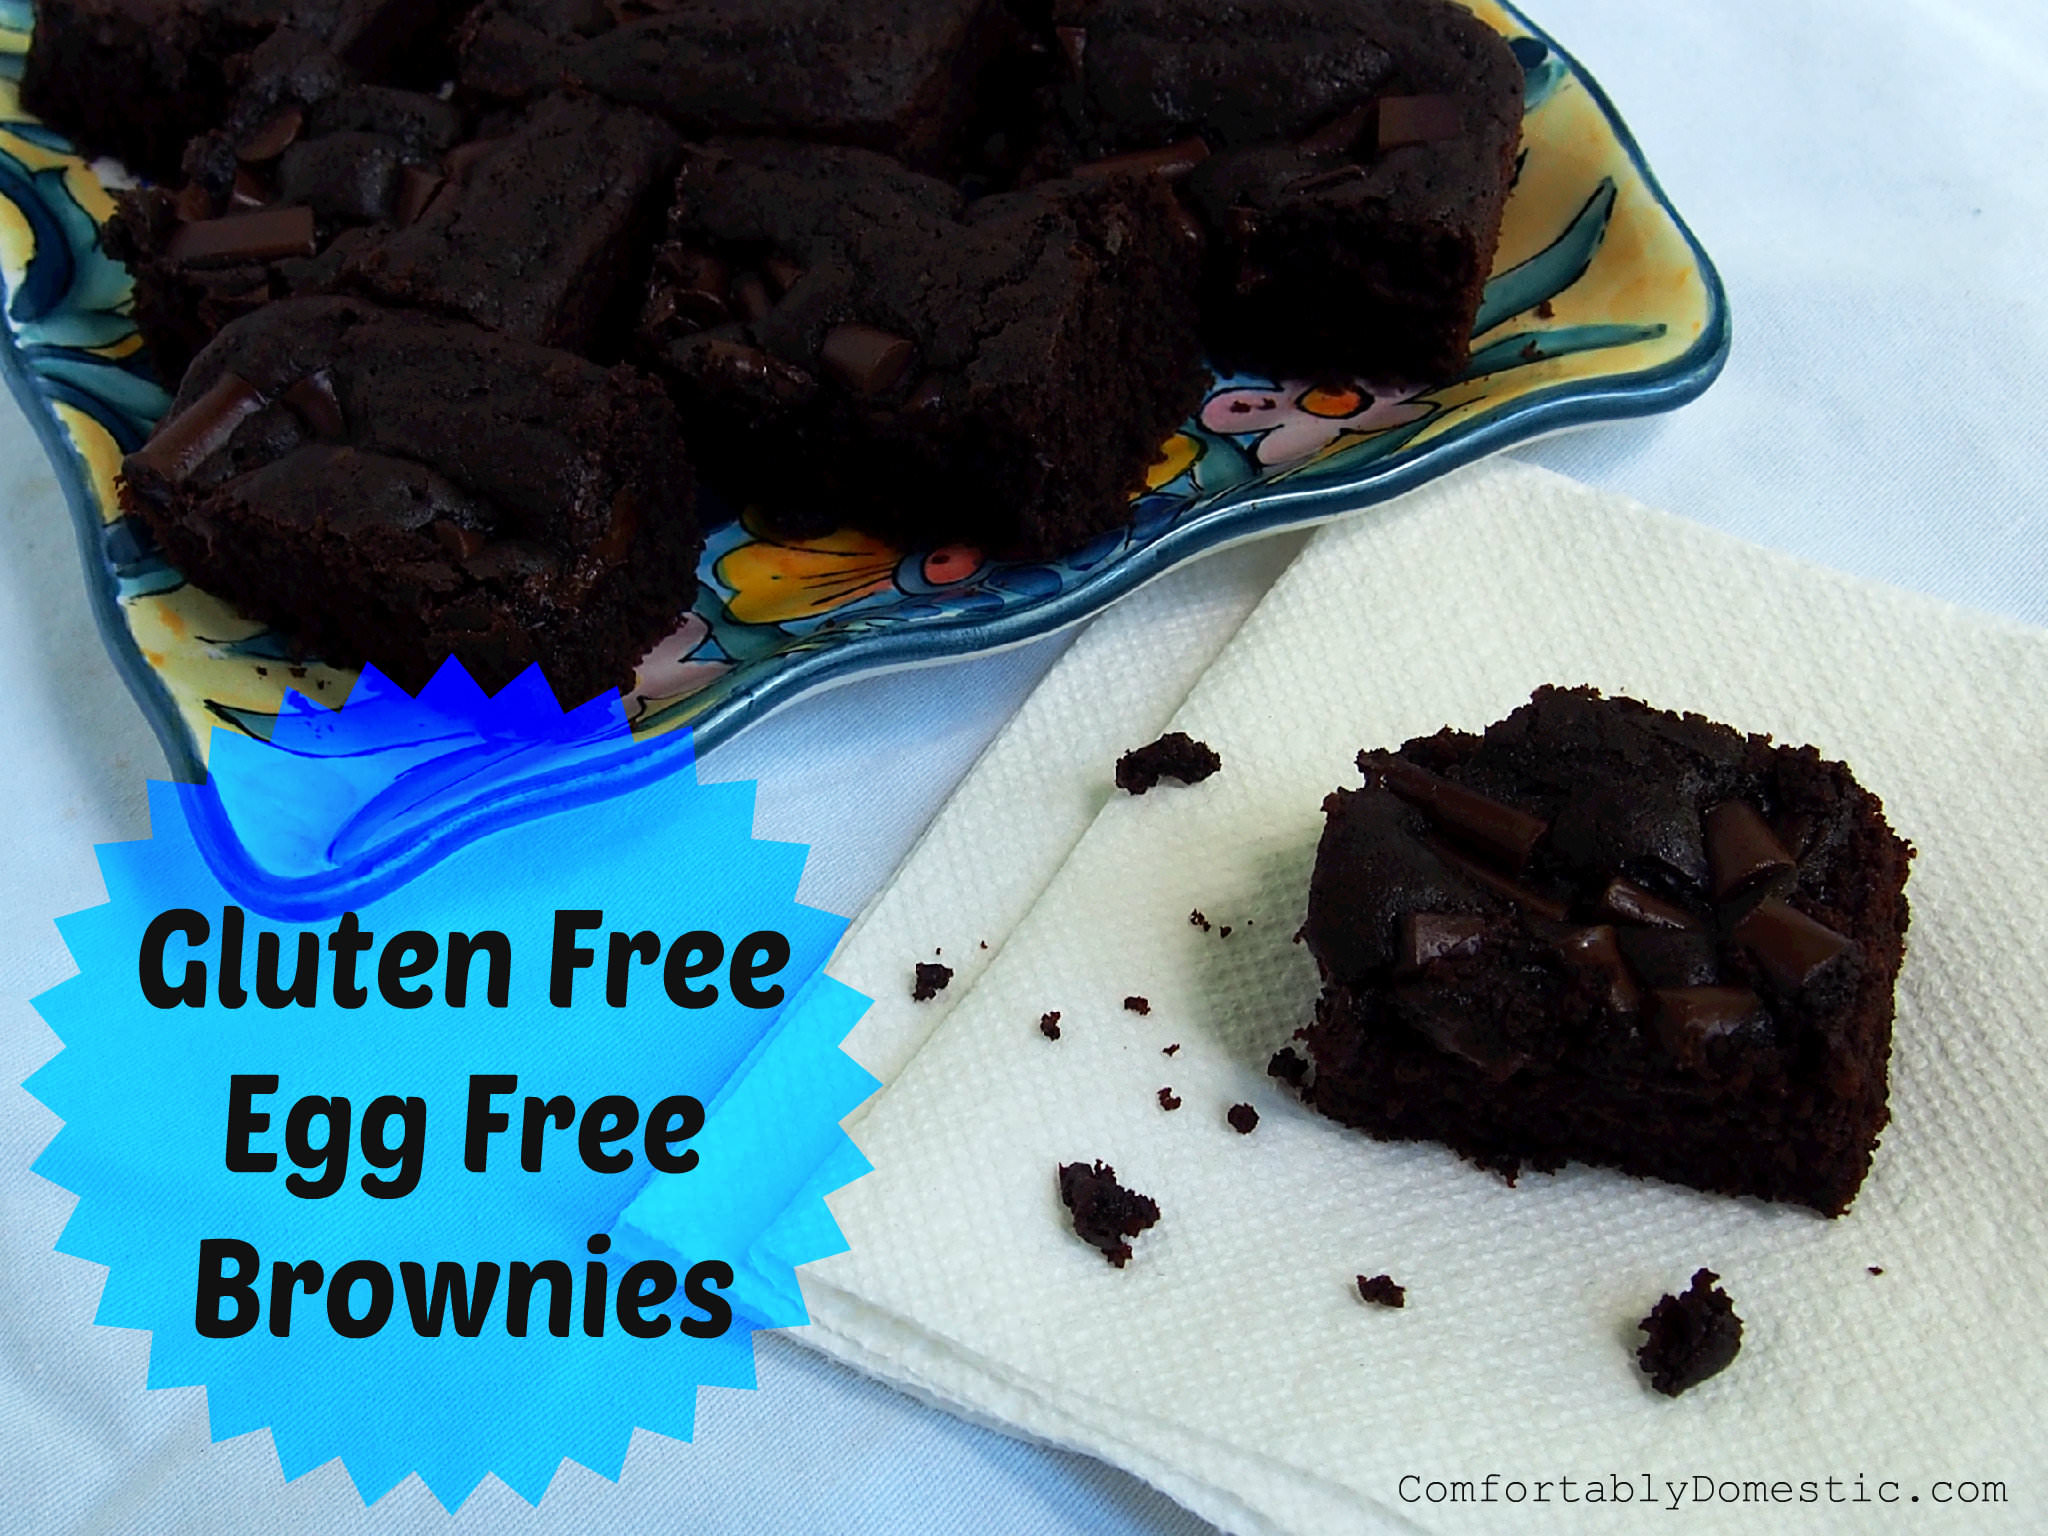 Allergy-Friendly Gluten Free, Egg Free Brownies | ComfortablyDomestic.com Delicious fudge brownies that are so good that you won't even miss what's missing! Free of gluten, eggs, nuts, and soy!